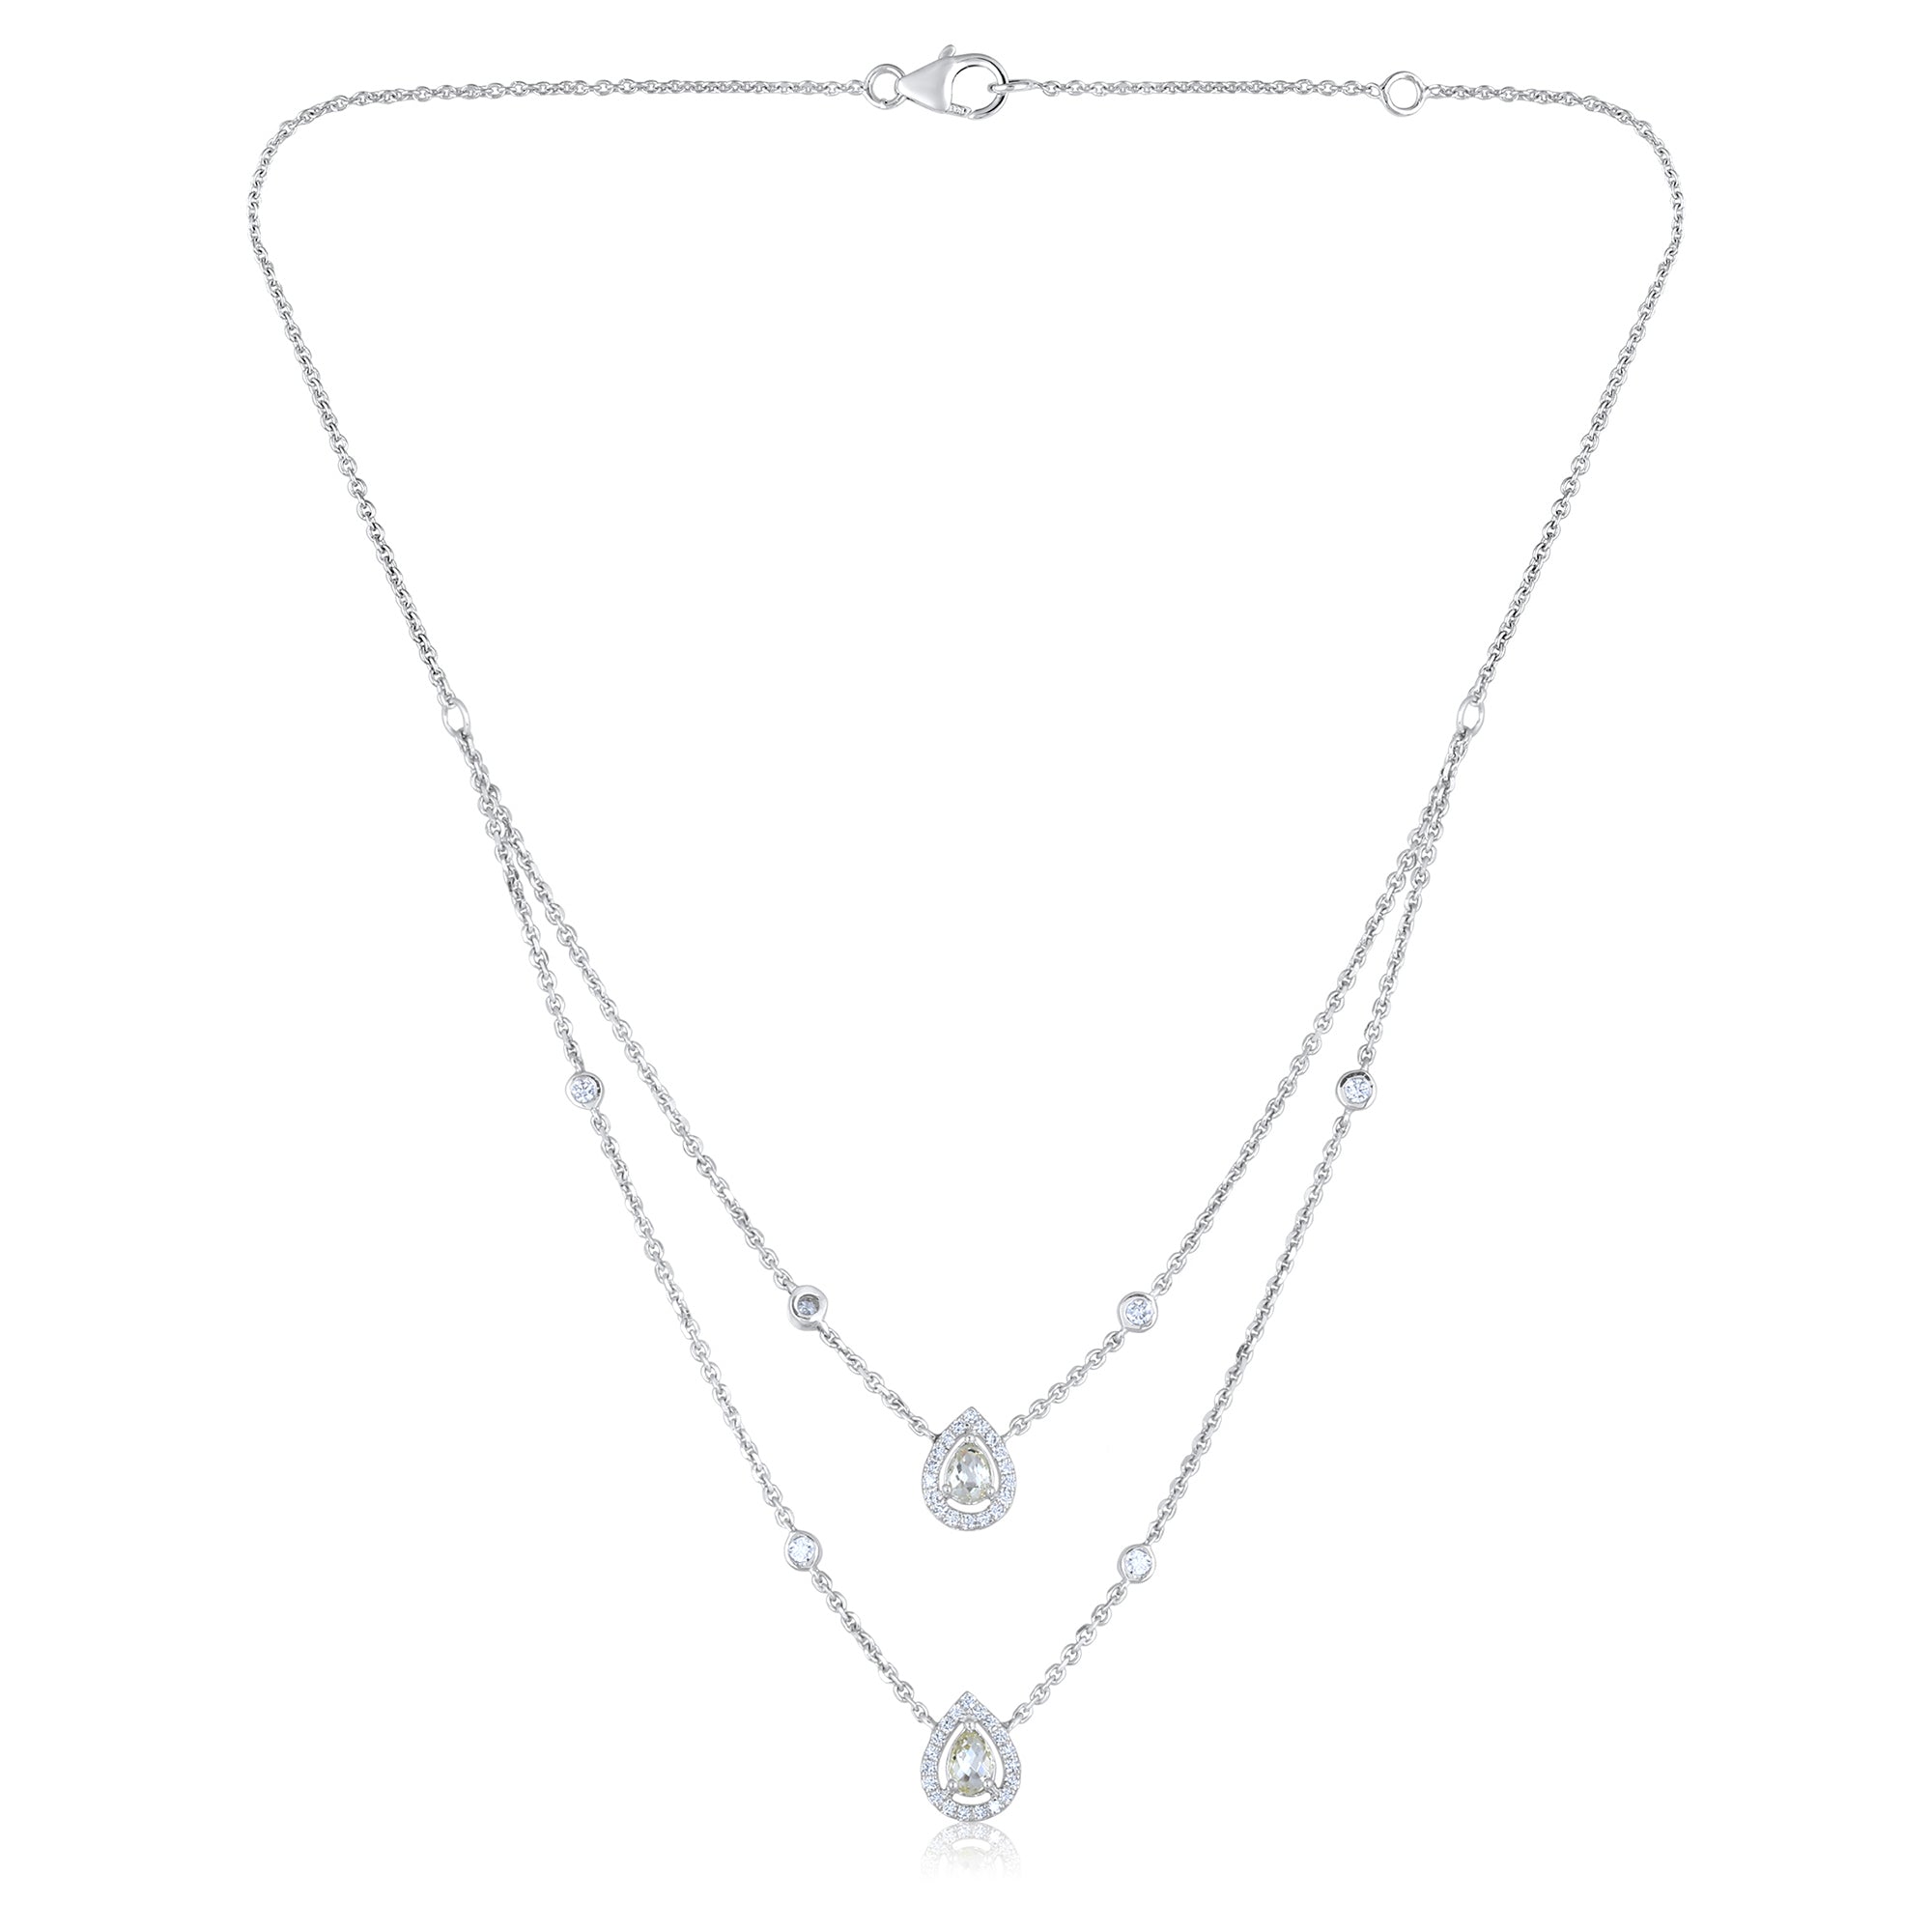 Certified 14K Gold 1.3ct Natural Diamond Pear Designer 2 Chain Layer White Necklace